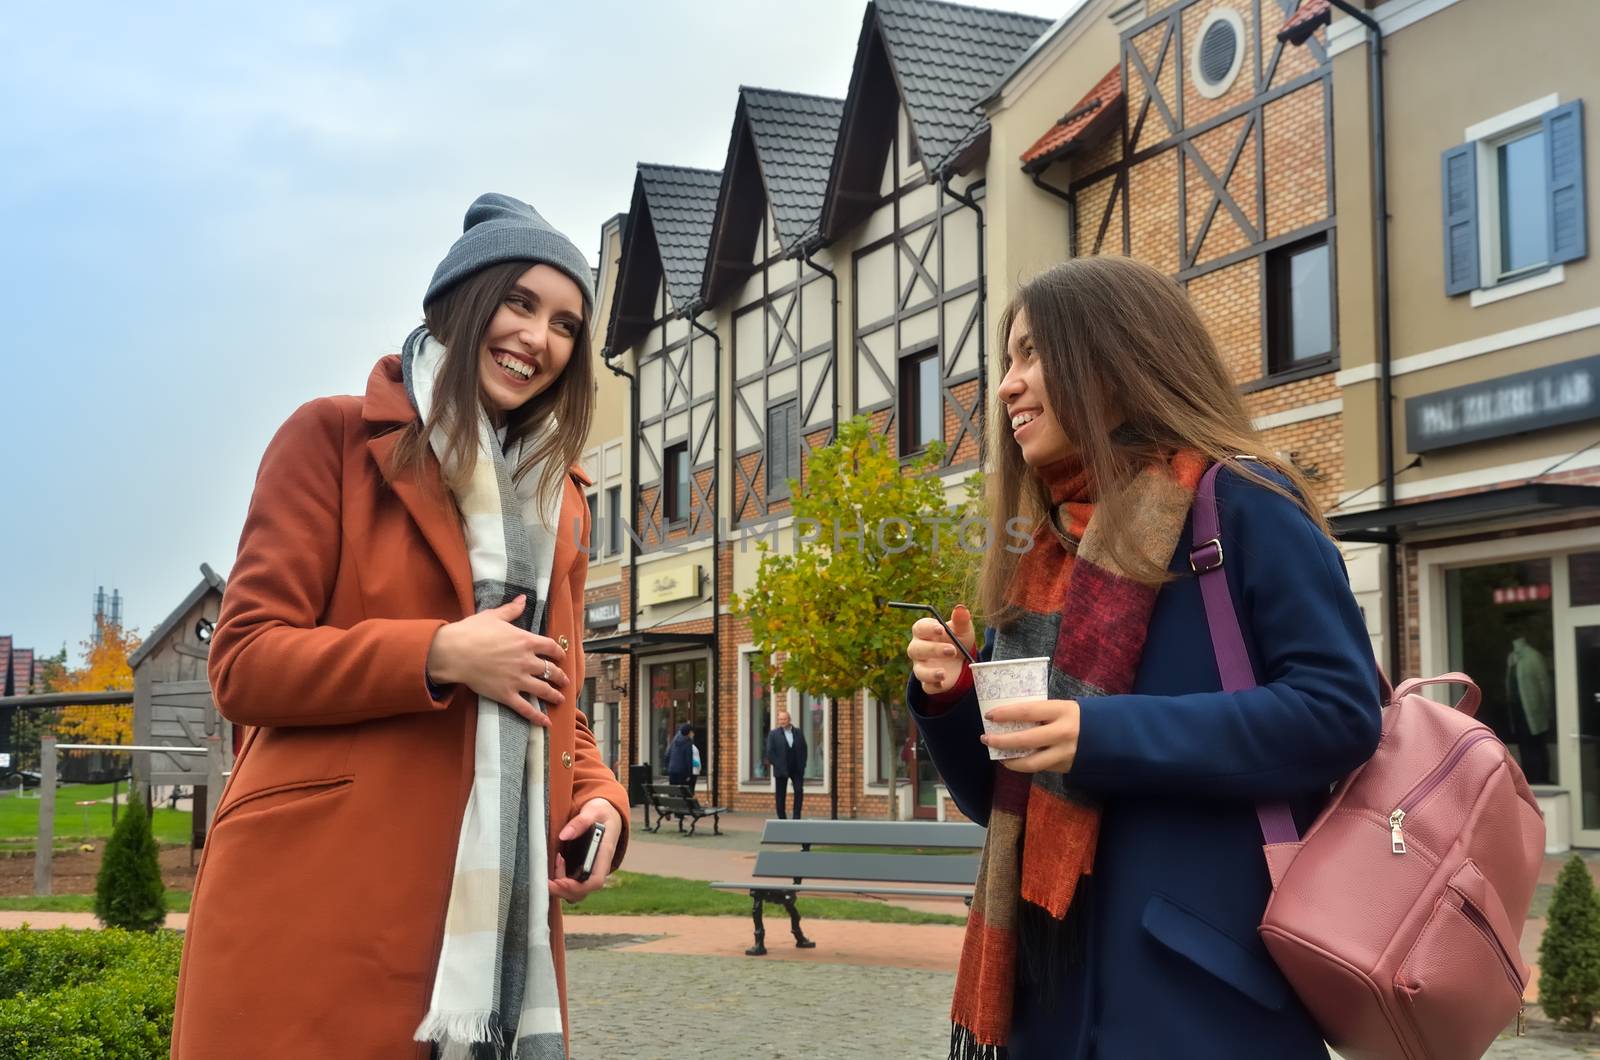 The two girlfriends laugh standing in the street near the shops, with coffee. Dressed in a coat, with backpacks. The cadre is from below. Horizontal photo.